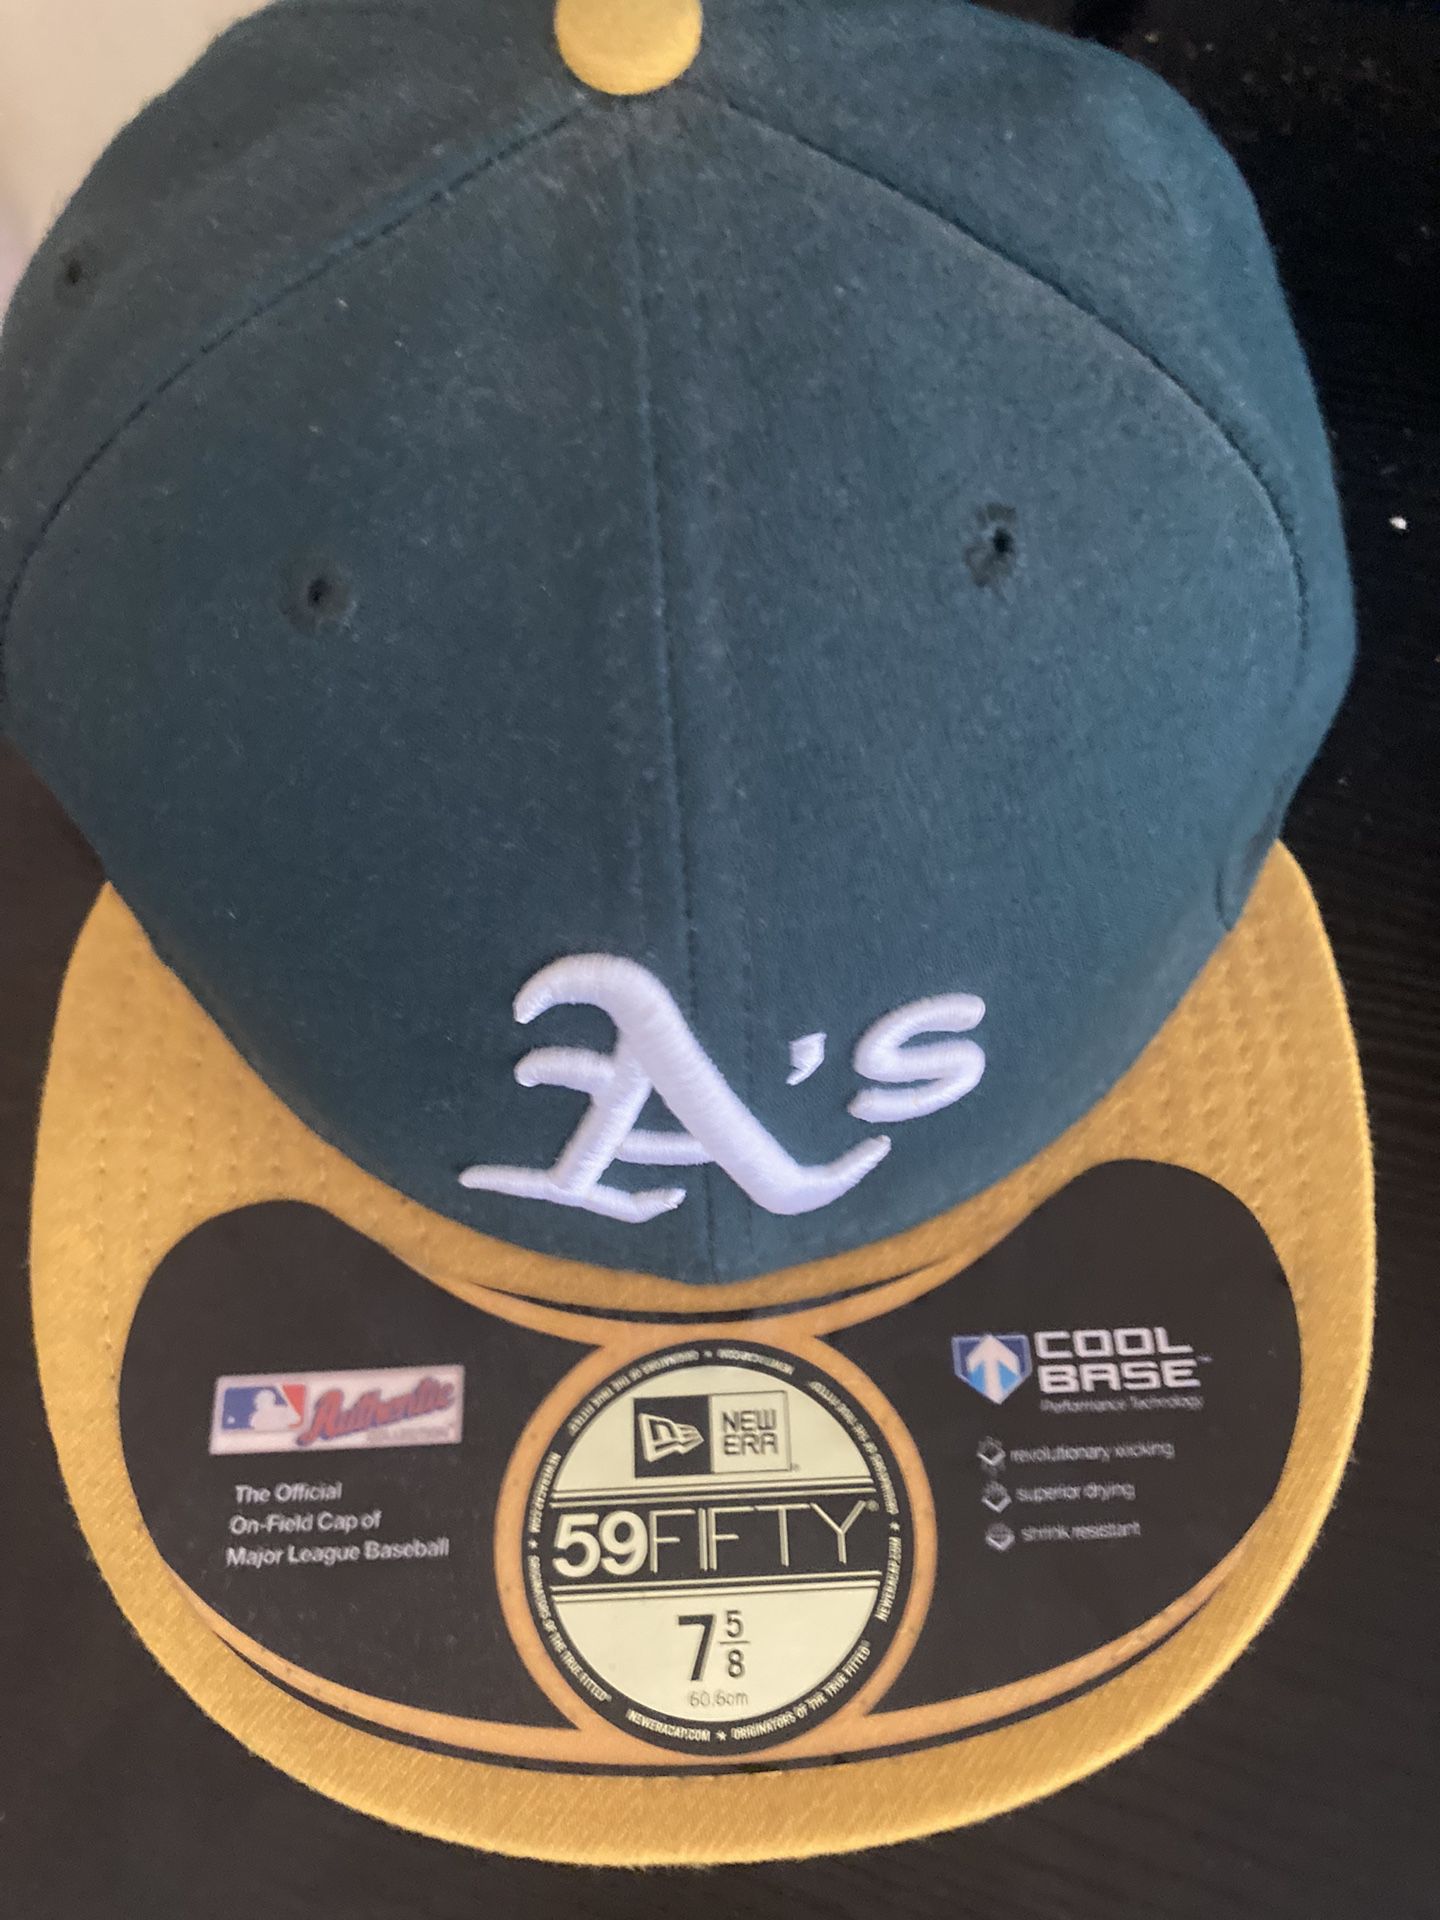 New Era Men's Oakland Athletics 59Fifty Home Green Authentic Hat